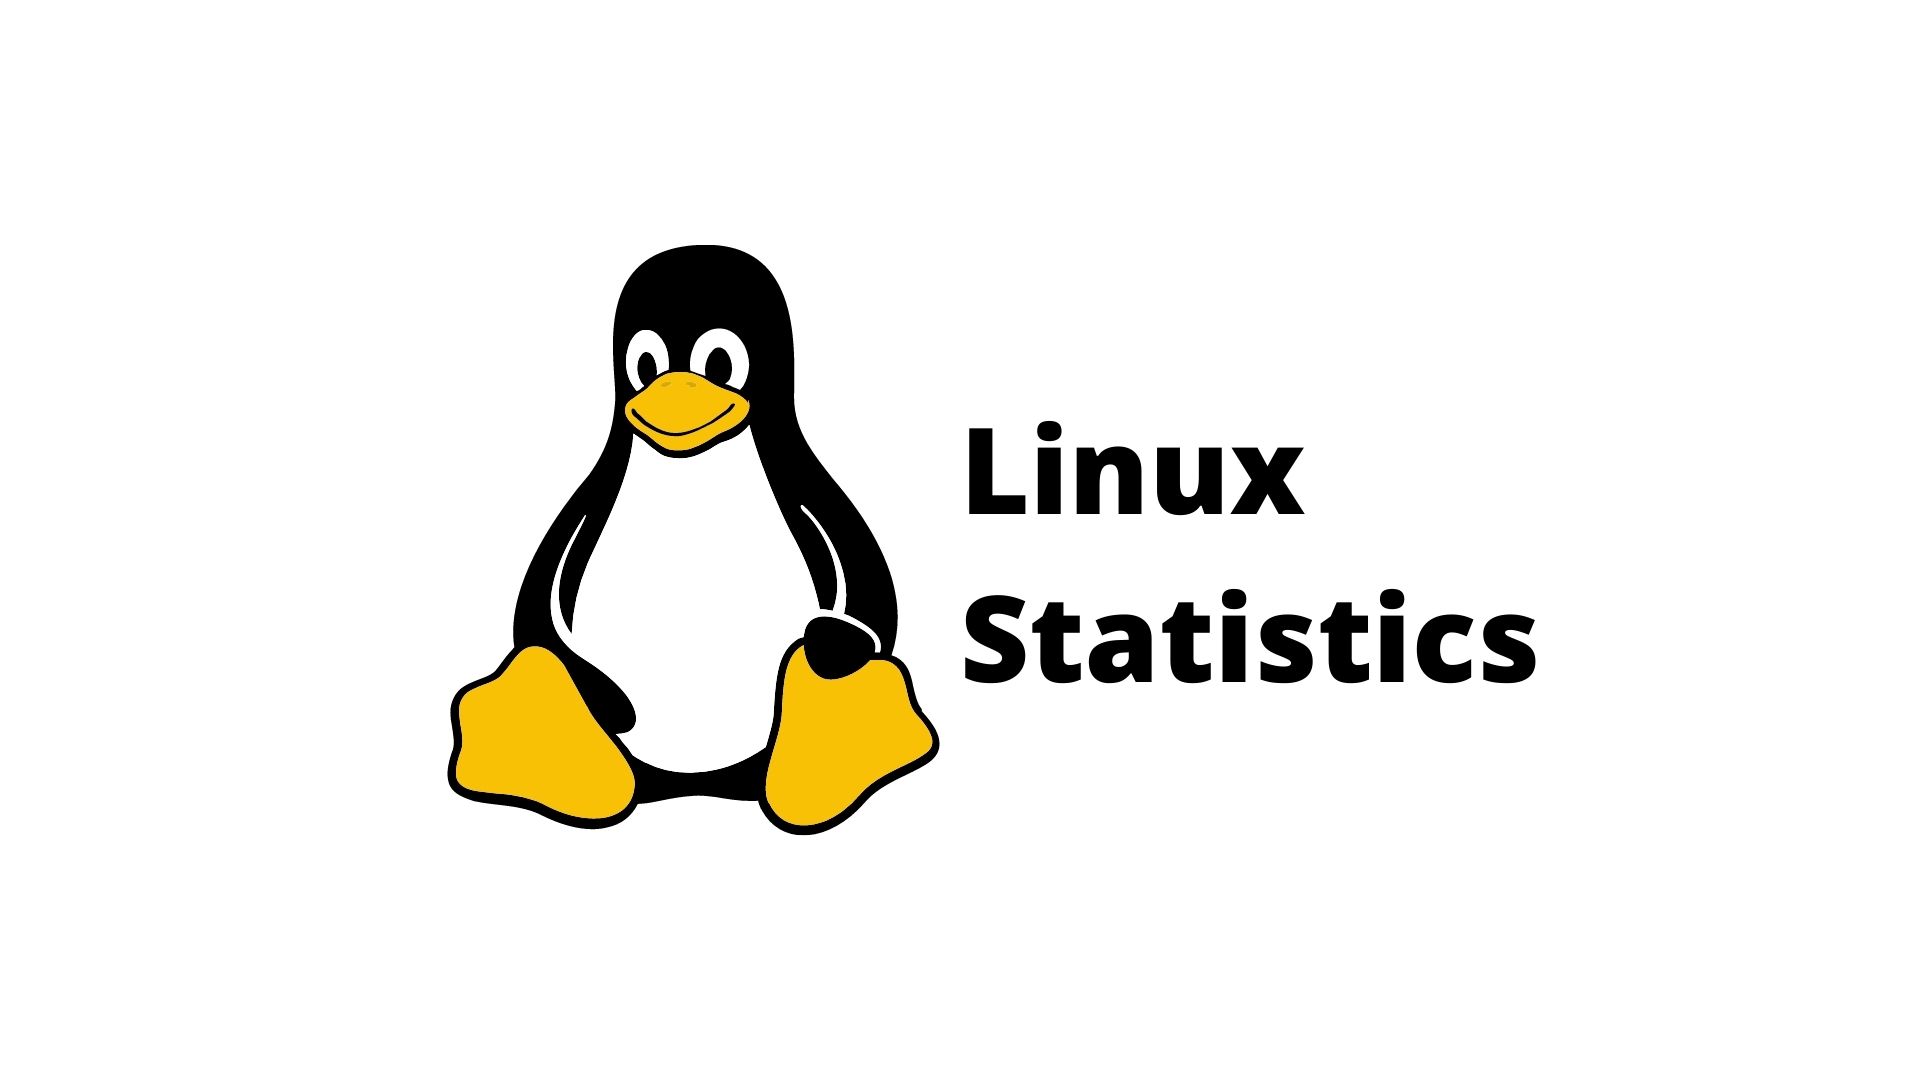 Linux Statistics 2023 By Market Share, Usage Data and Facts